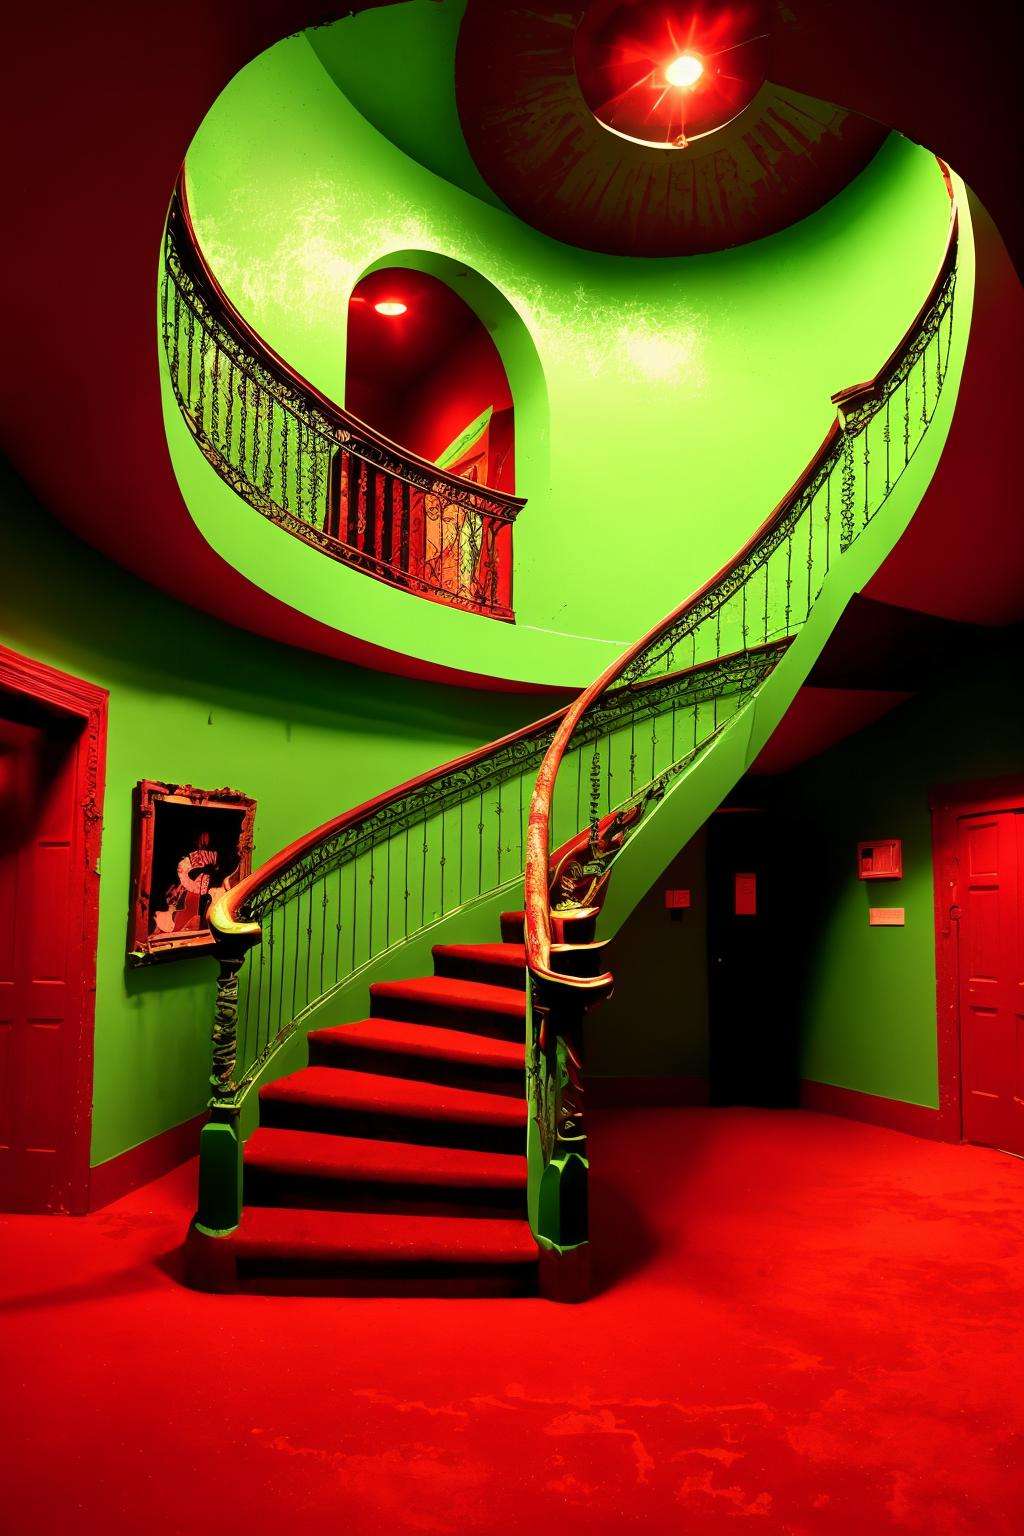 a spiral staircase in a green room with a red carpet , a red light shines on a house in the country